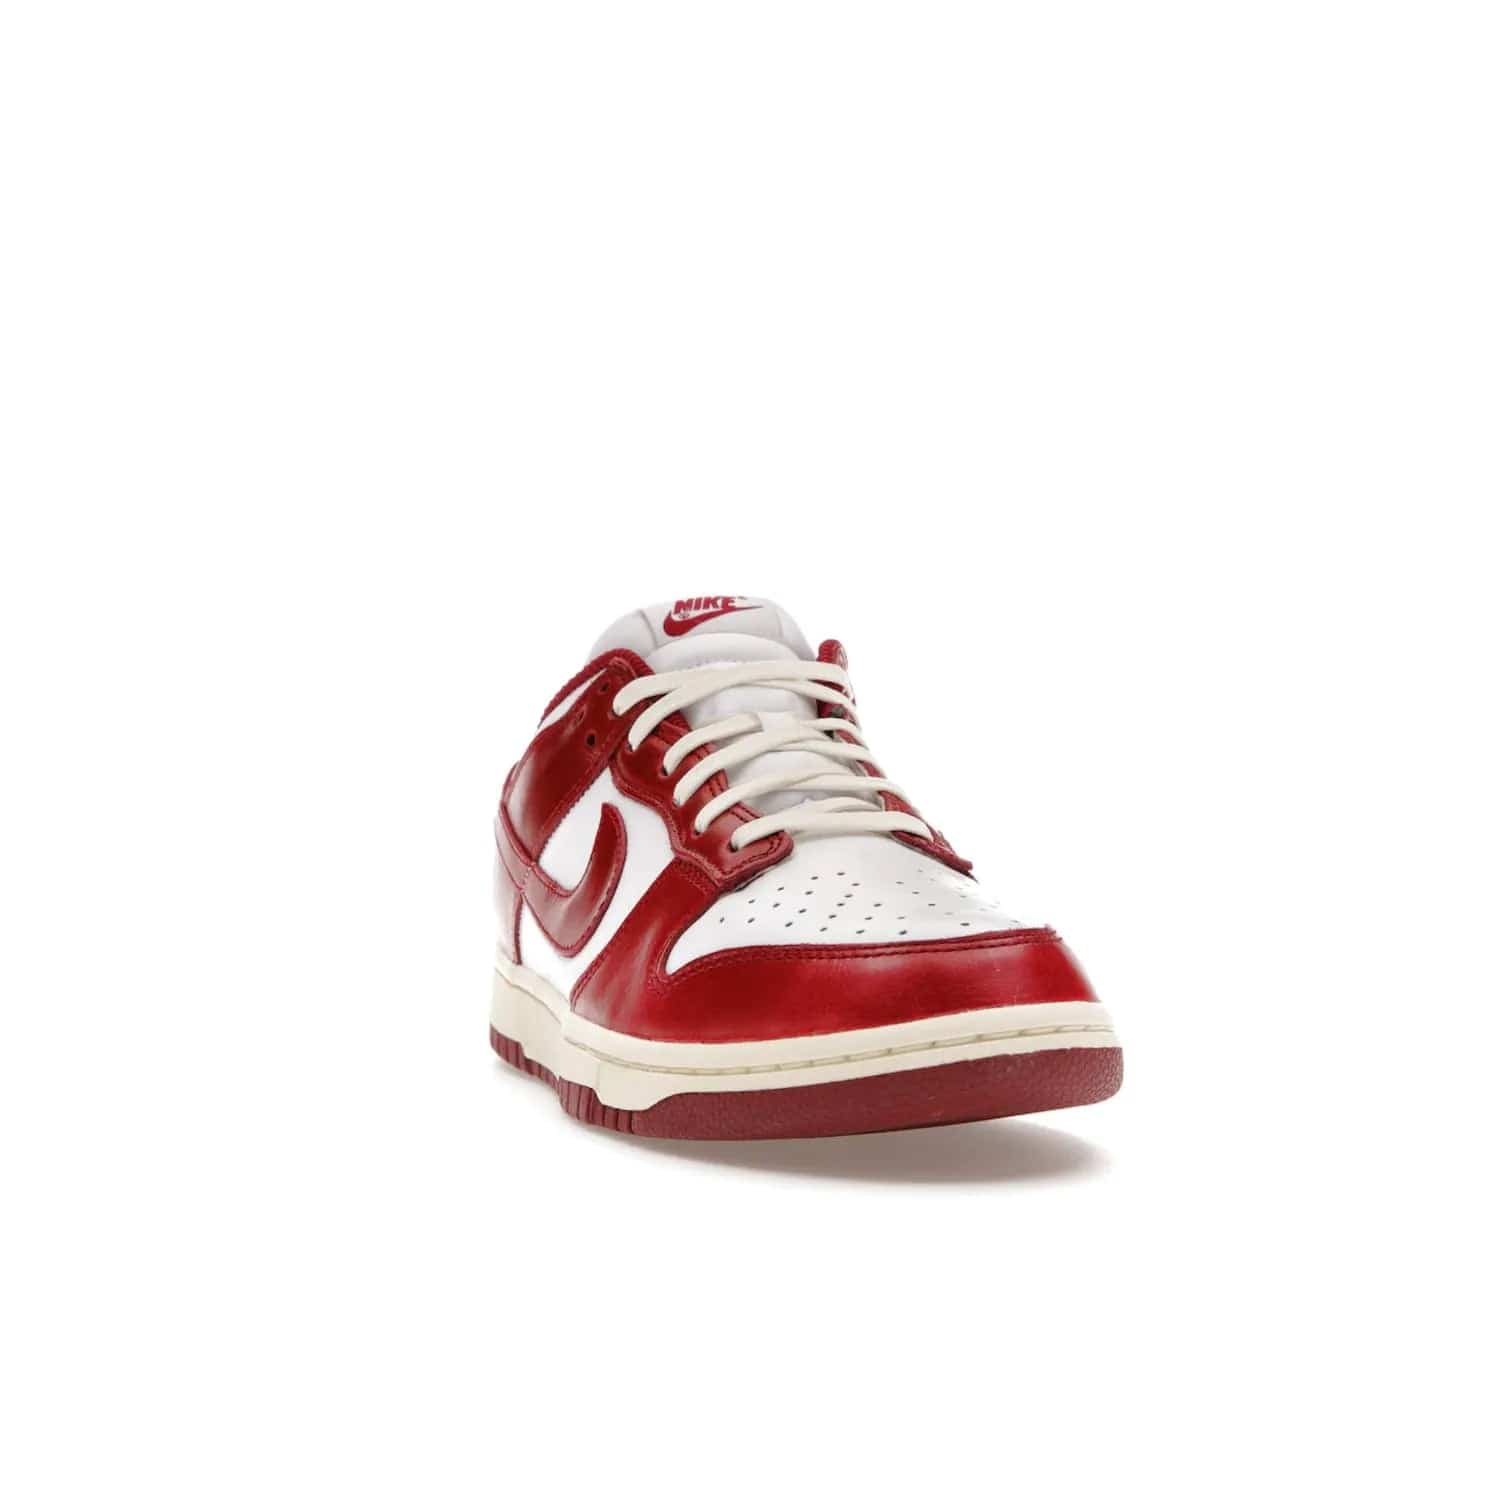 Nike Dunk Low PRM Vintage Team Red (Women's) - Image 8 - Only at www.BallersClubKickz.com - Shop the stylish Nike Dunk Low PRM Vintage Team Red. Signature Red and White leather with Coconut Milk midsoles for an aged finish. 21 April 2023 release.